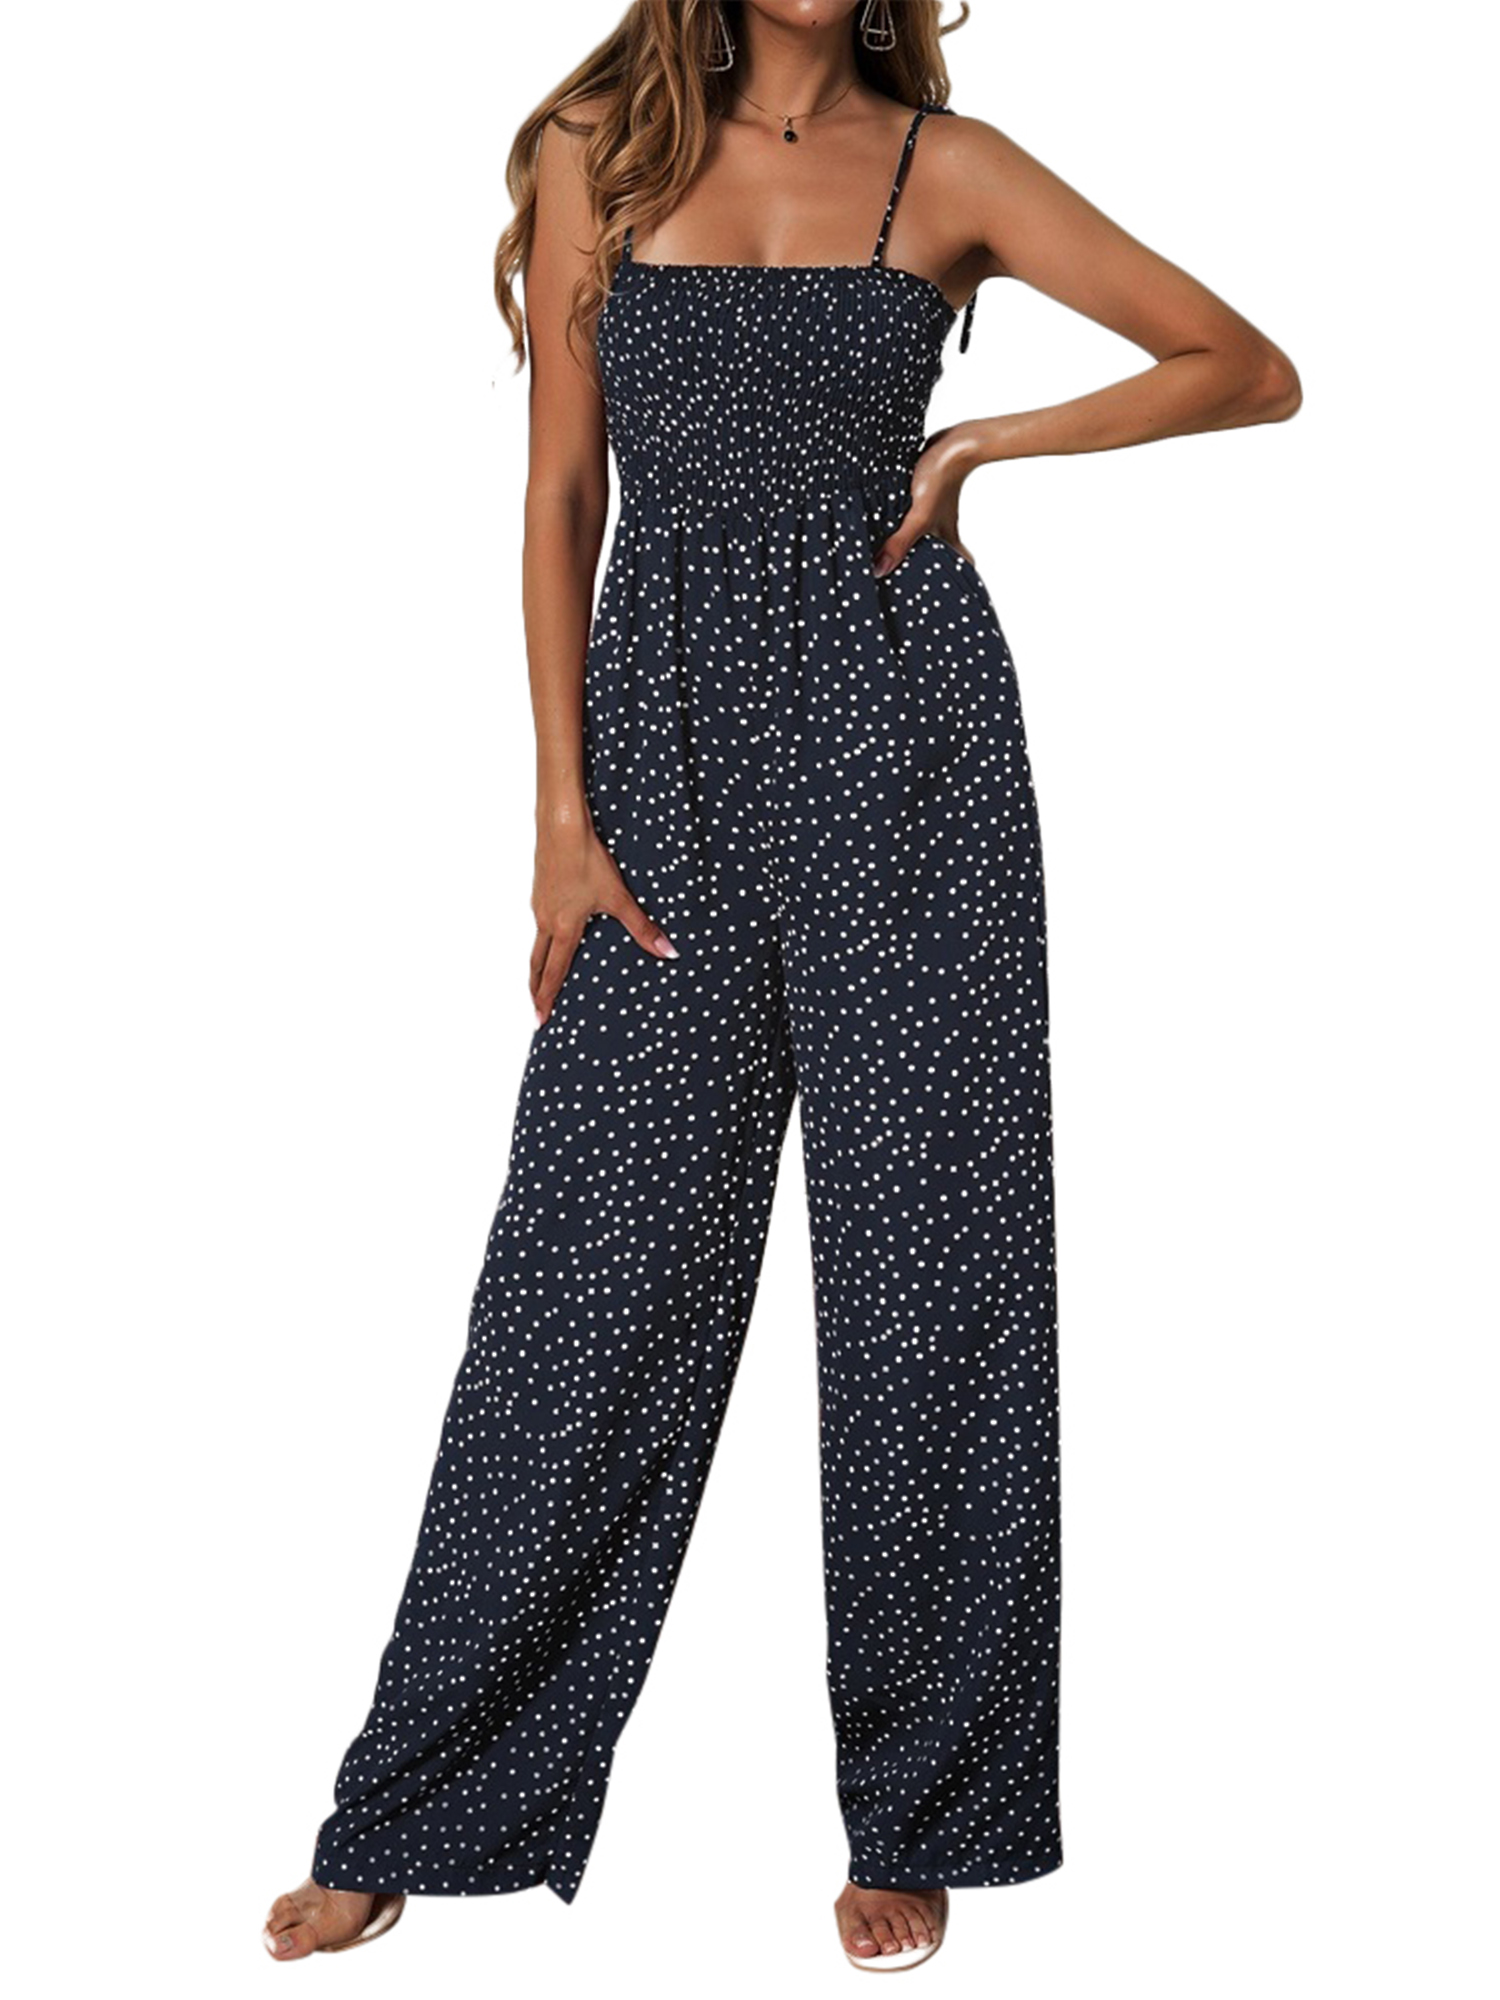 Strapless Jumpsuit For Women Polka Dot Wide Leg Evening Party Playsuit Ladies Casual Loose Rompers Long Trousers - image 4 of 8